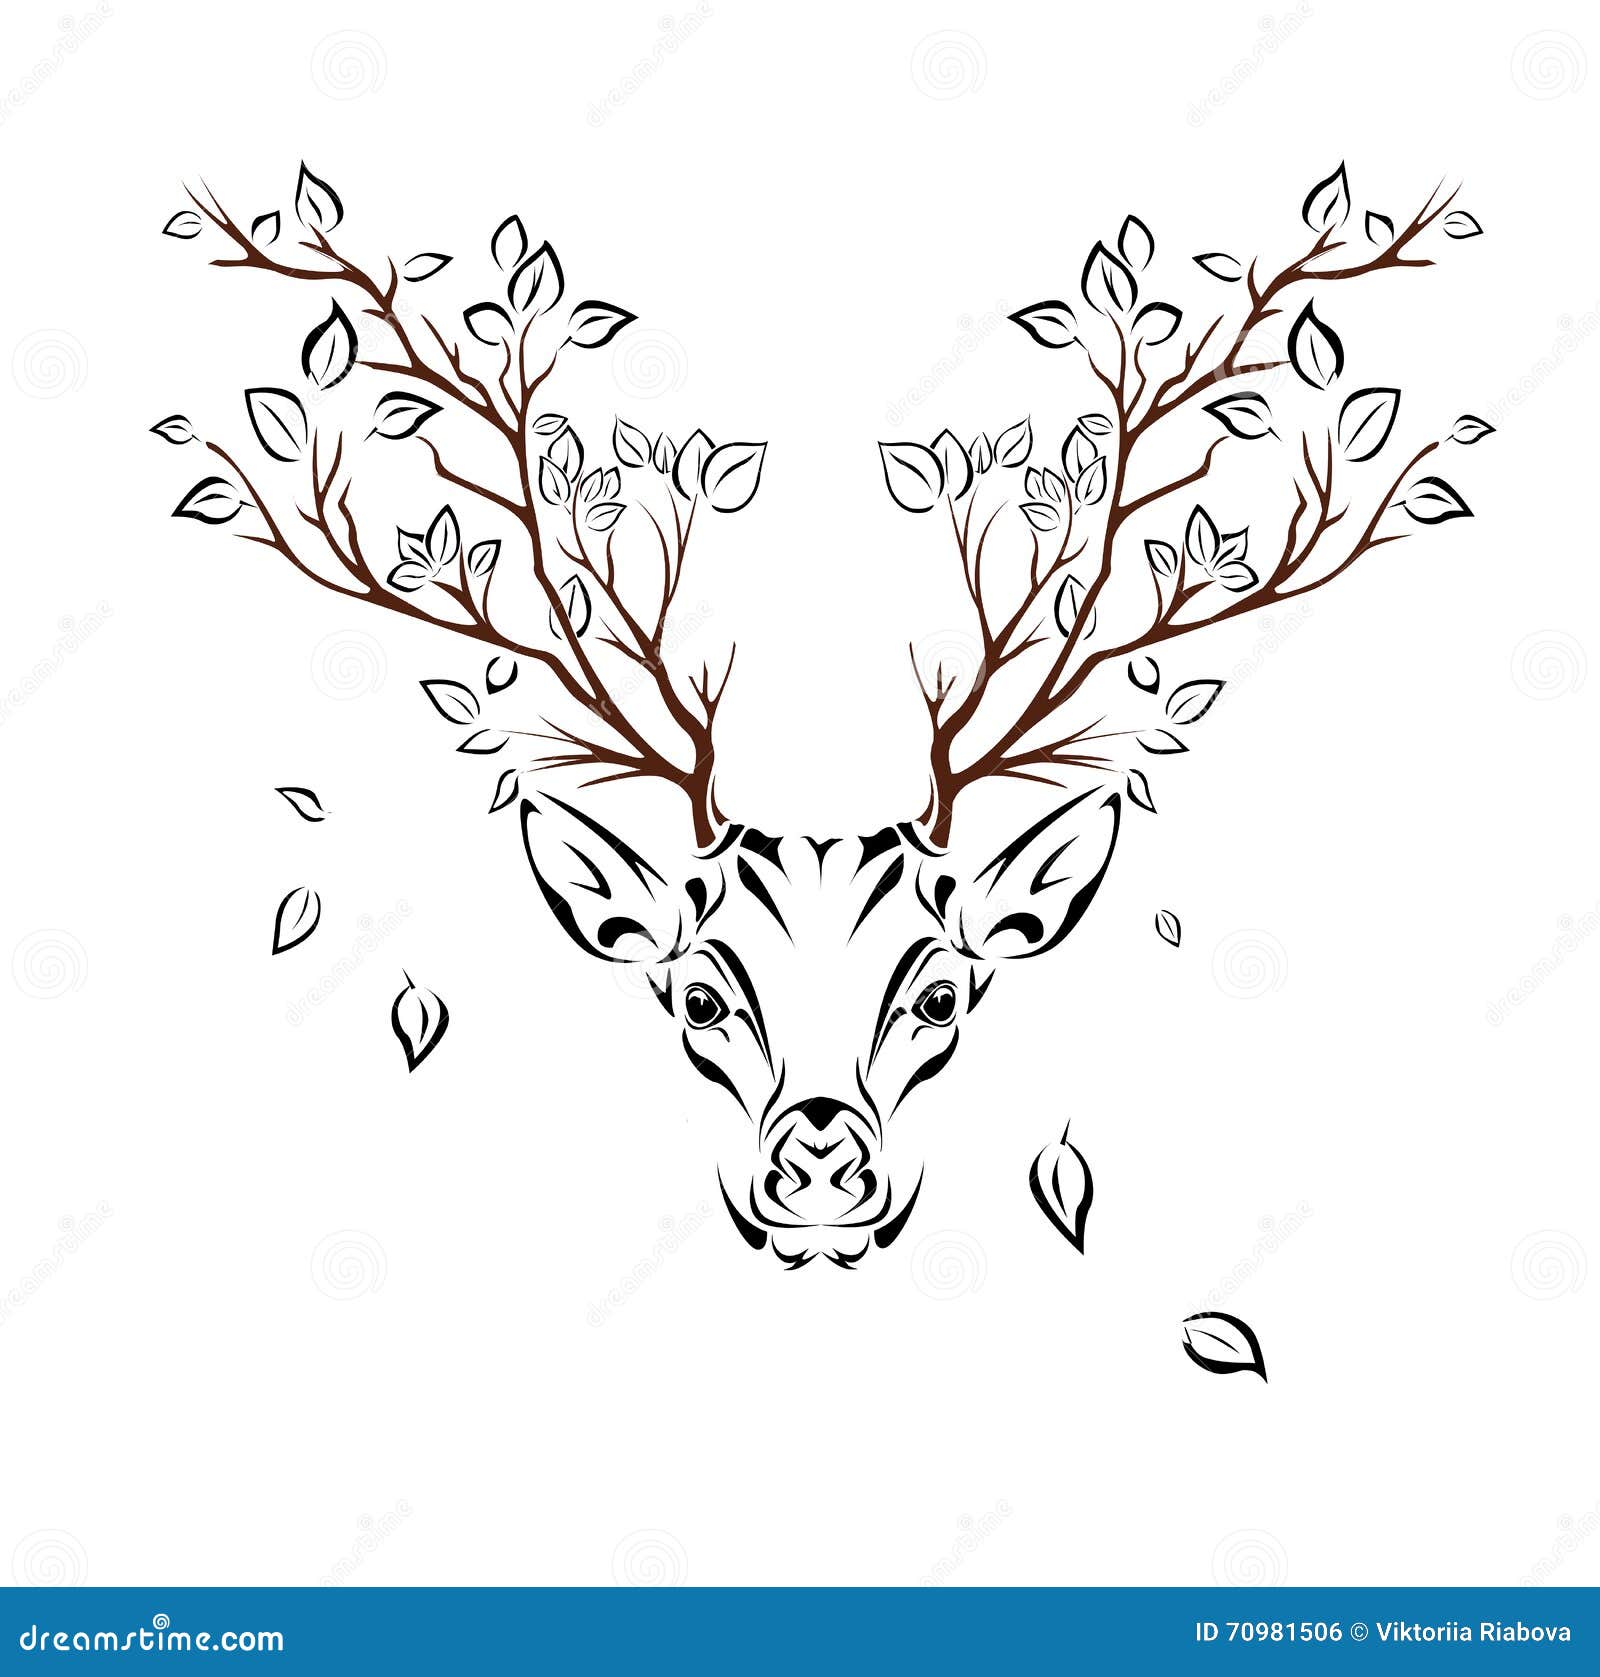 Hand drawn abstract portrait of a deer vector stylized illustration for  tattoo logo wall decor tshirt print design or  CanStock